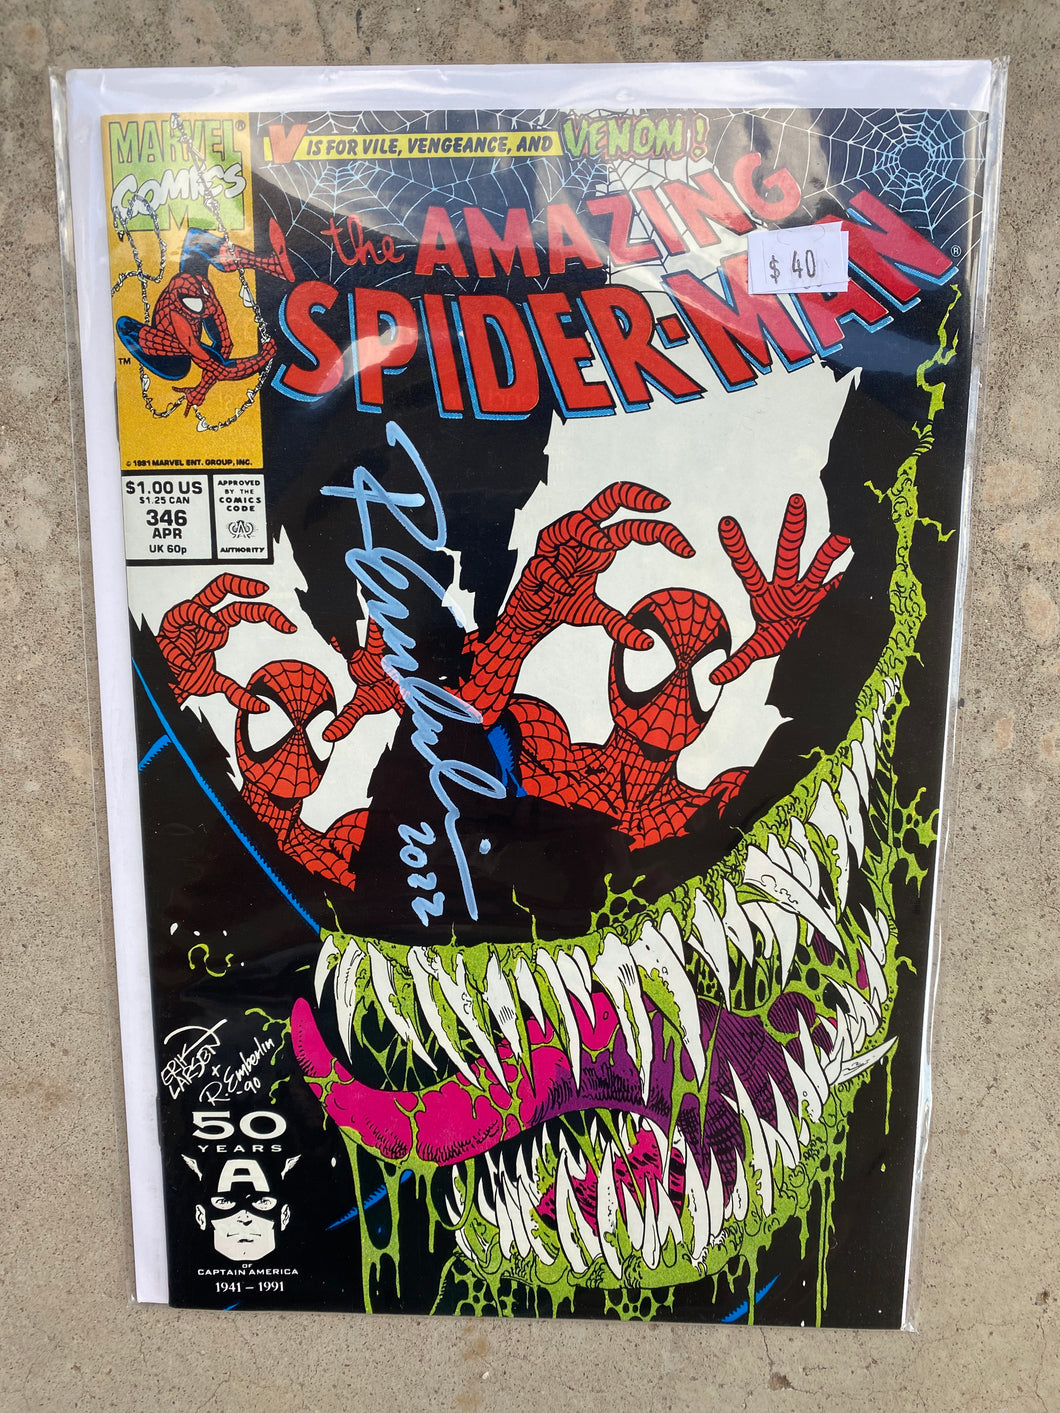 Amazing Spider-Man #346 signed by Emberlin!